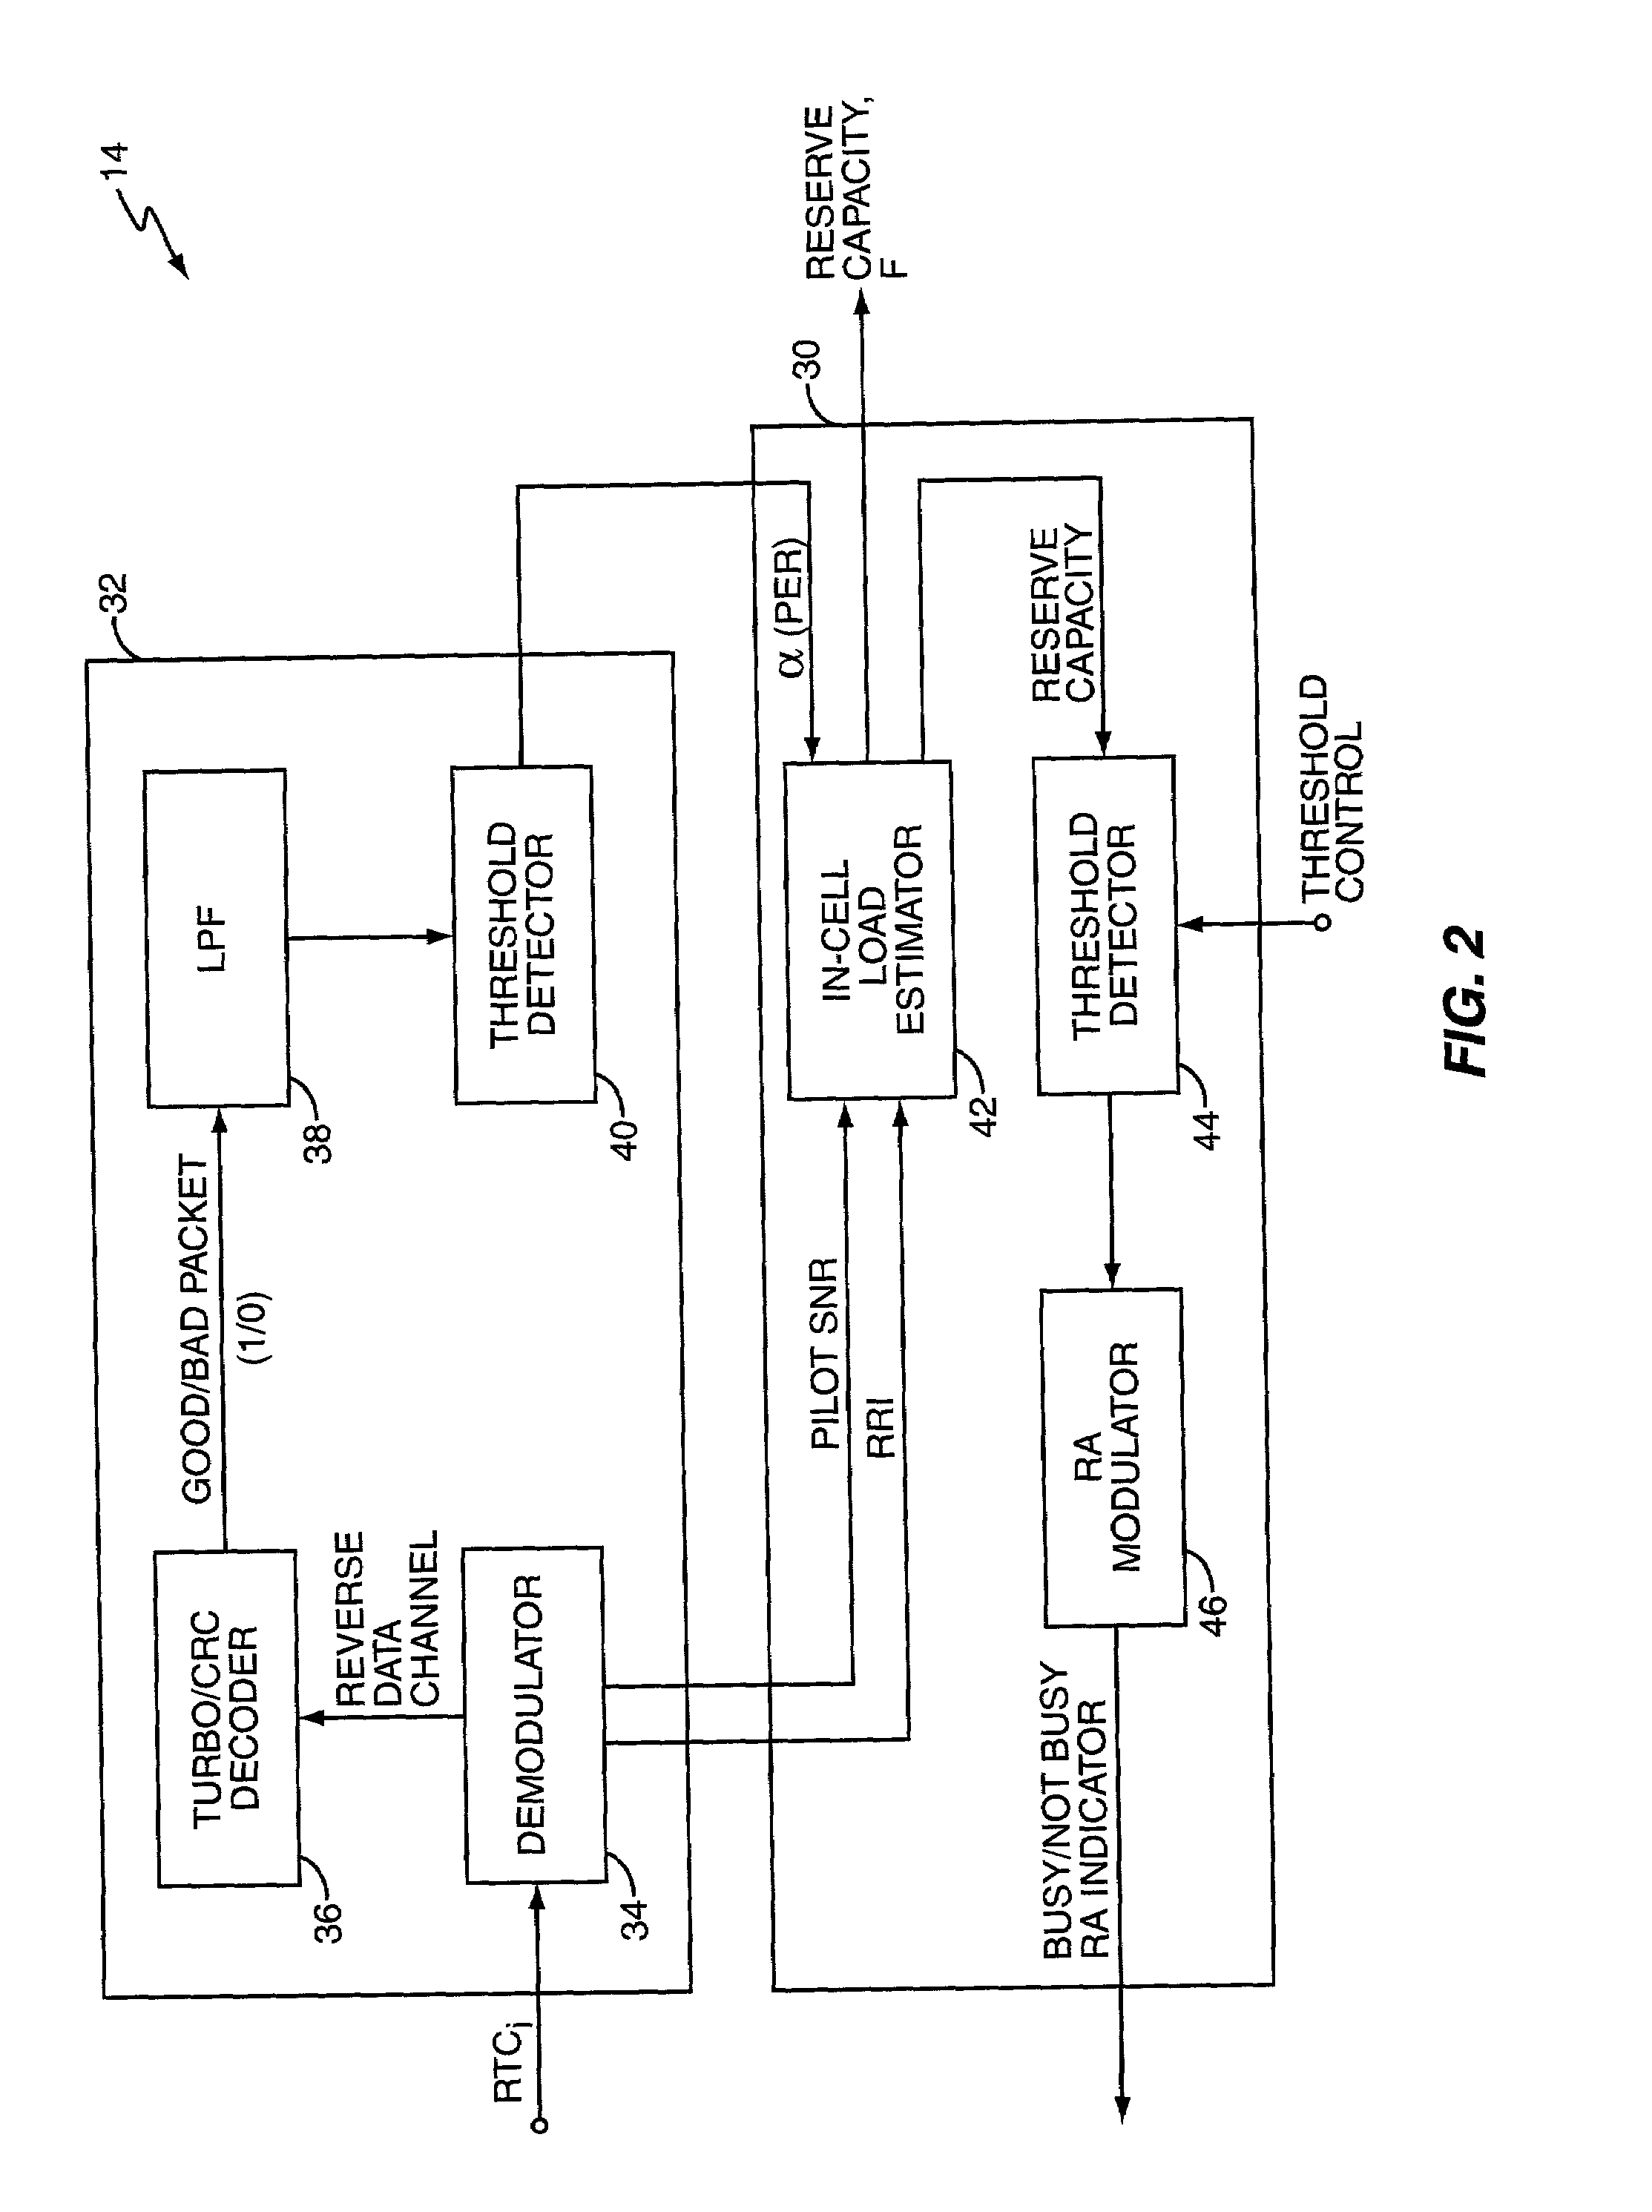 Fast flow control methods for communication networks